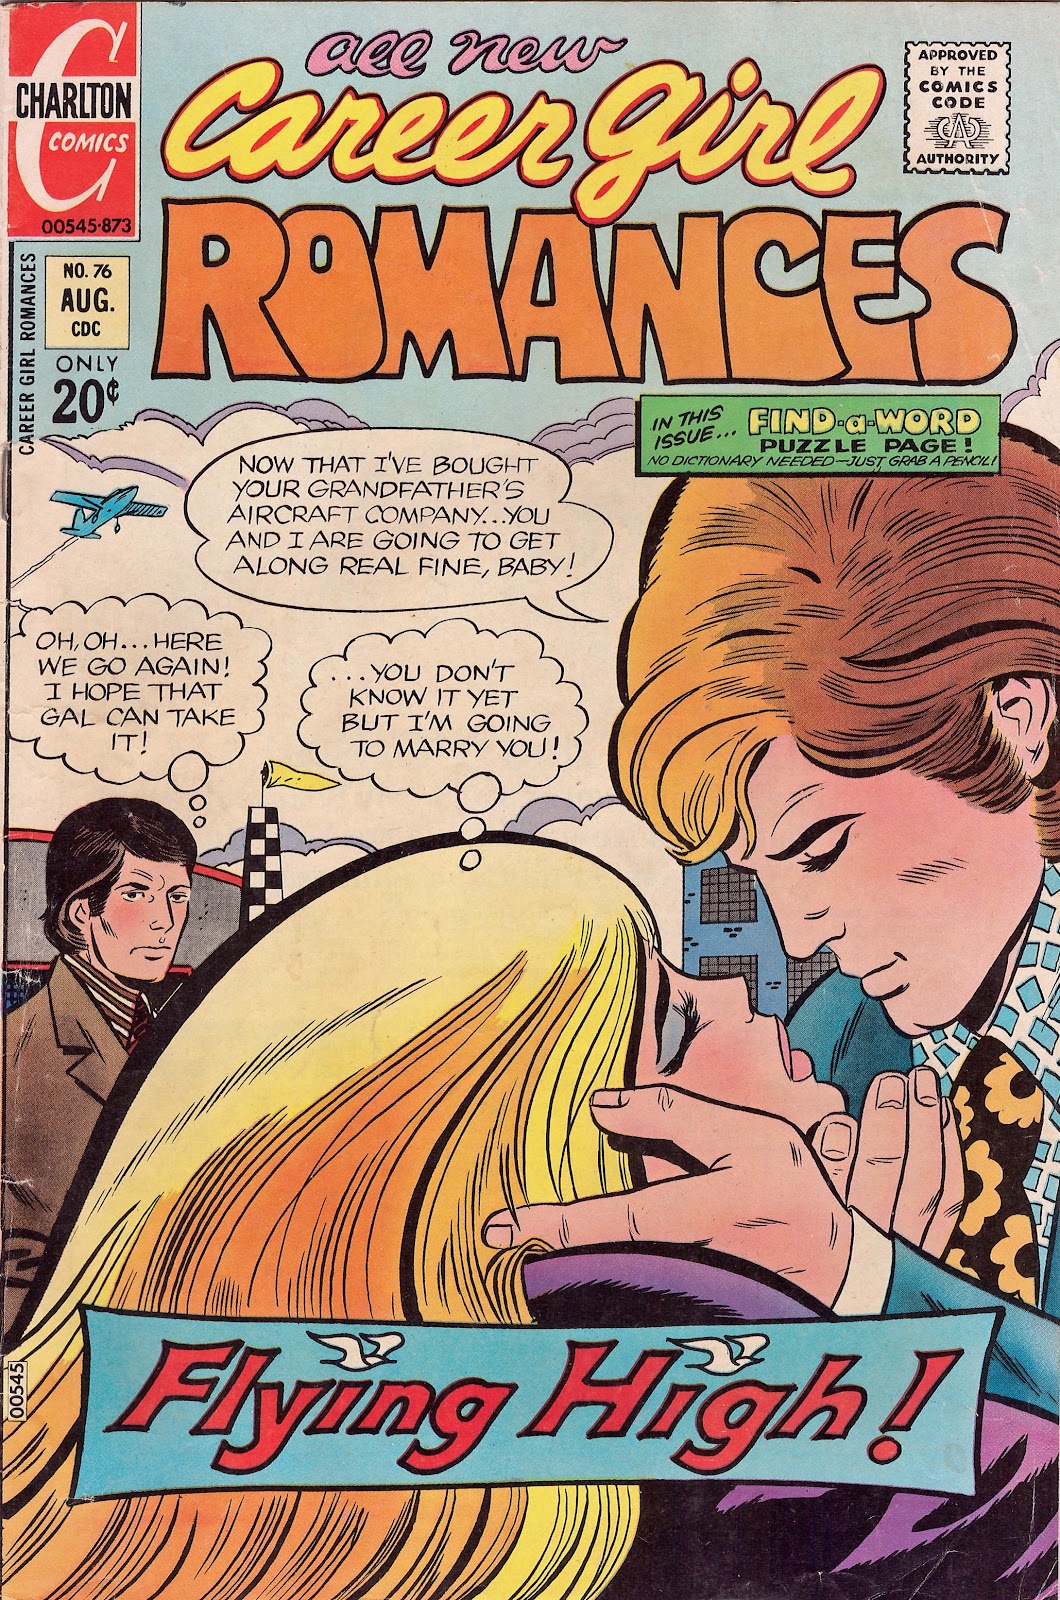 Career Girl Romances issue 76 - Page 1